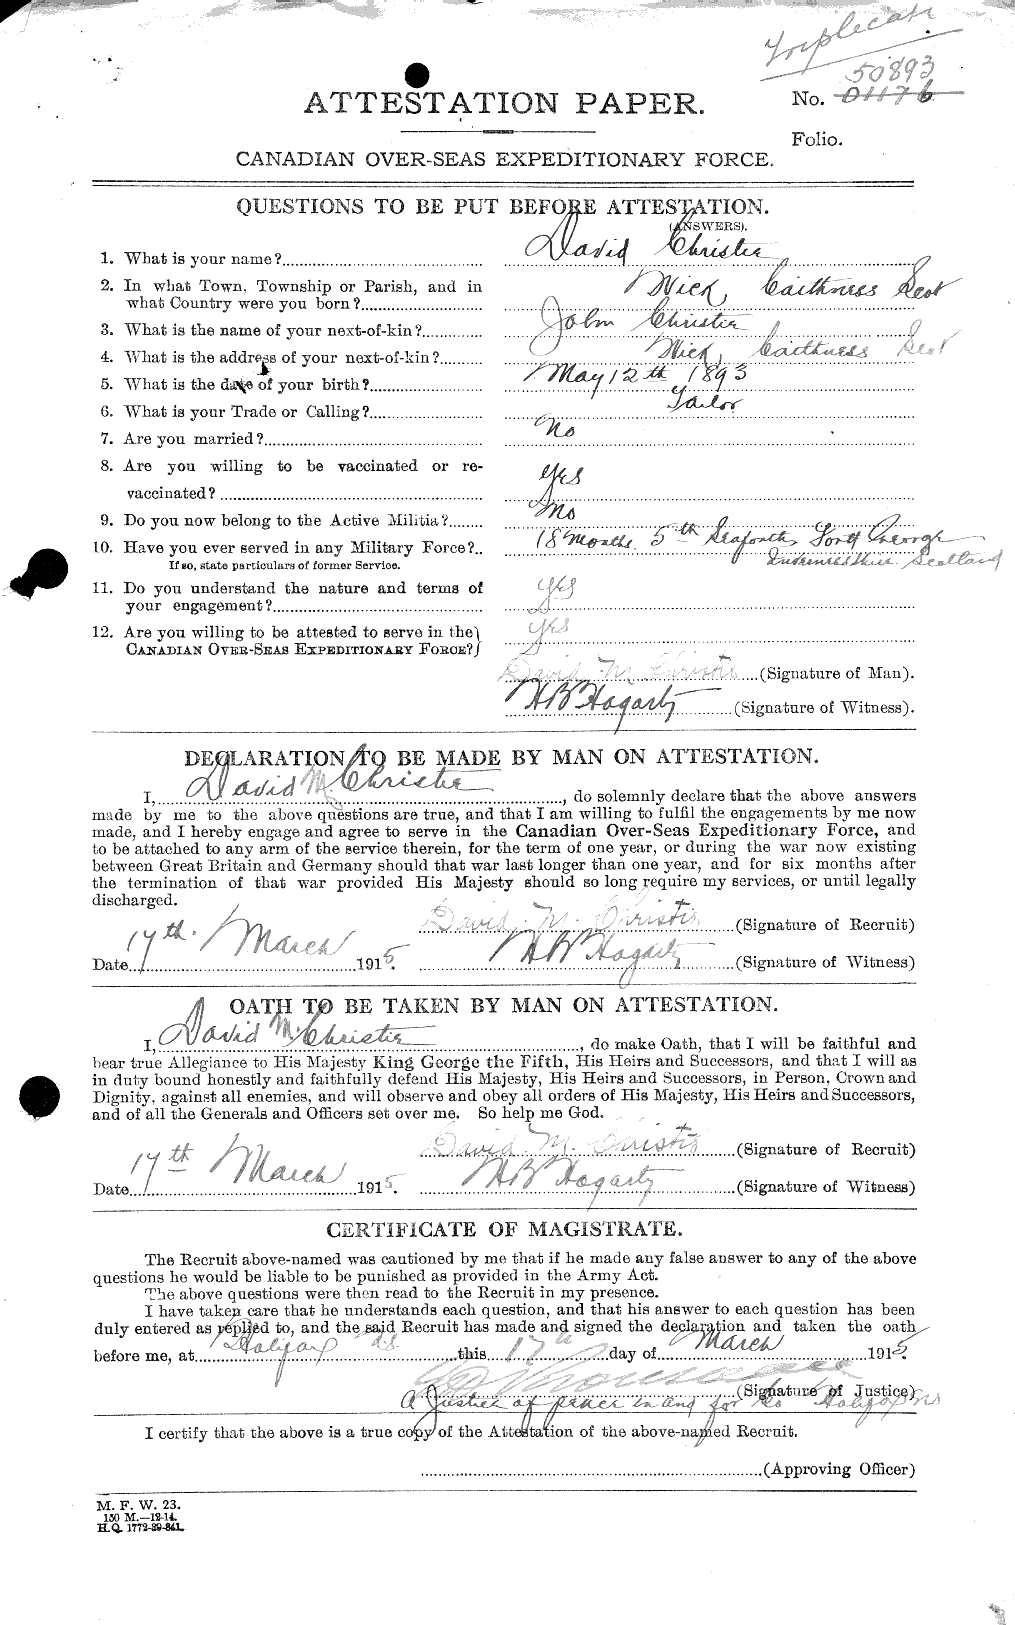 Personnel Records of the First World War - CEF 021907a